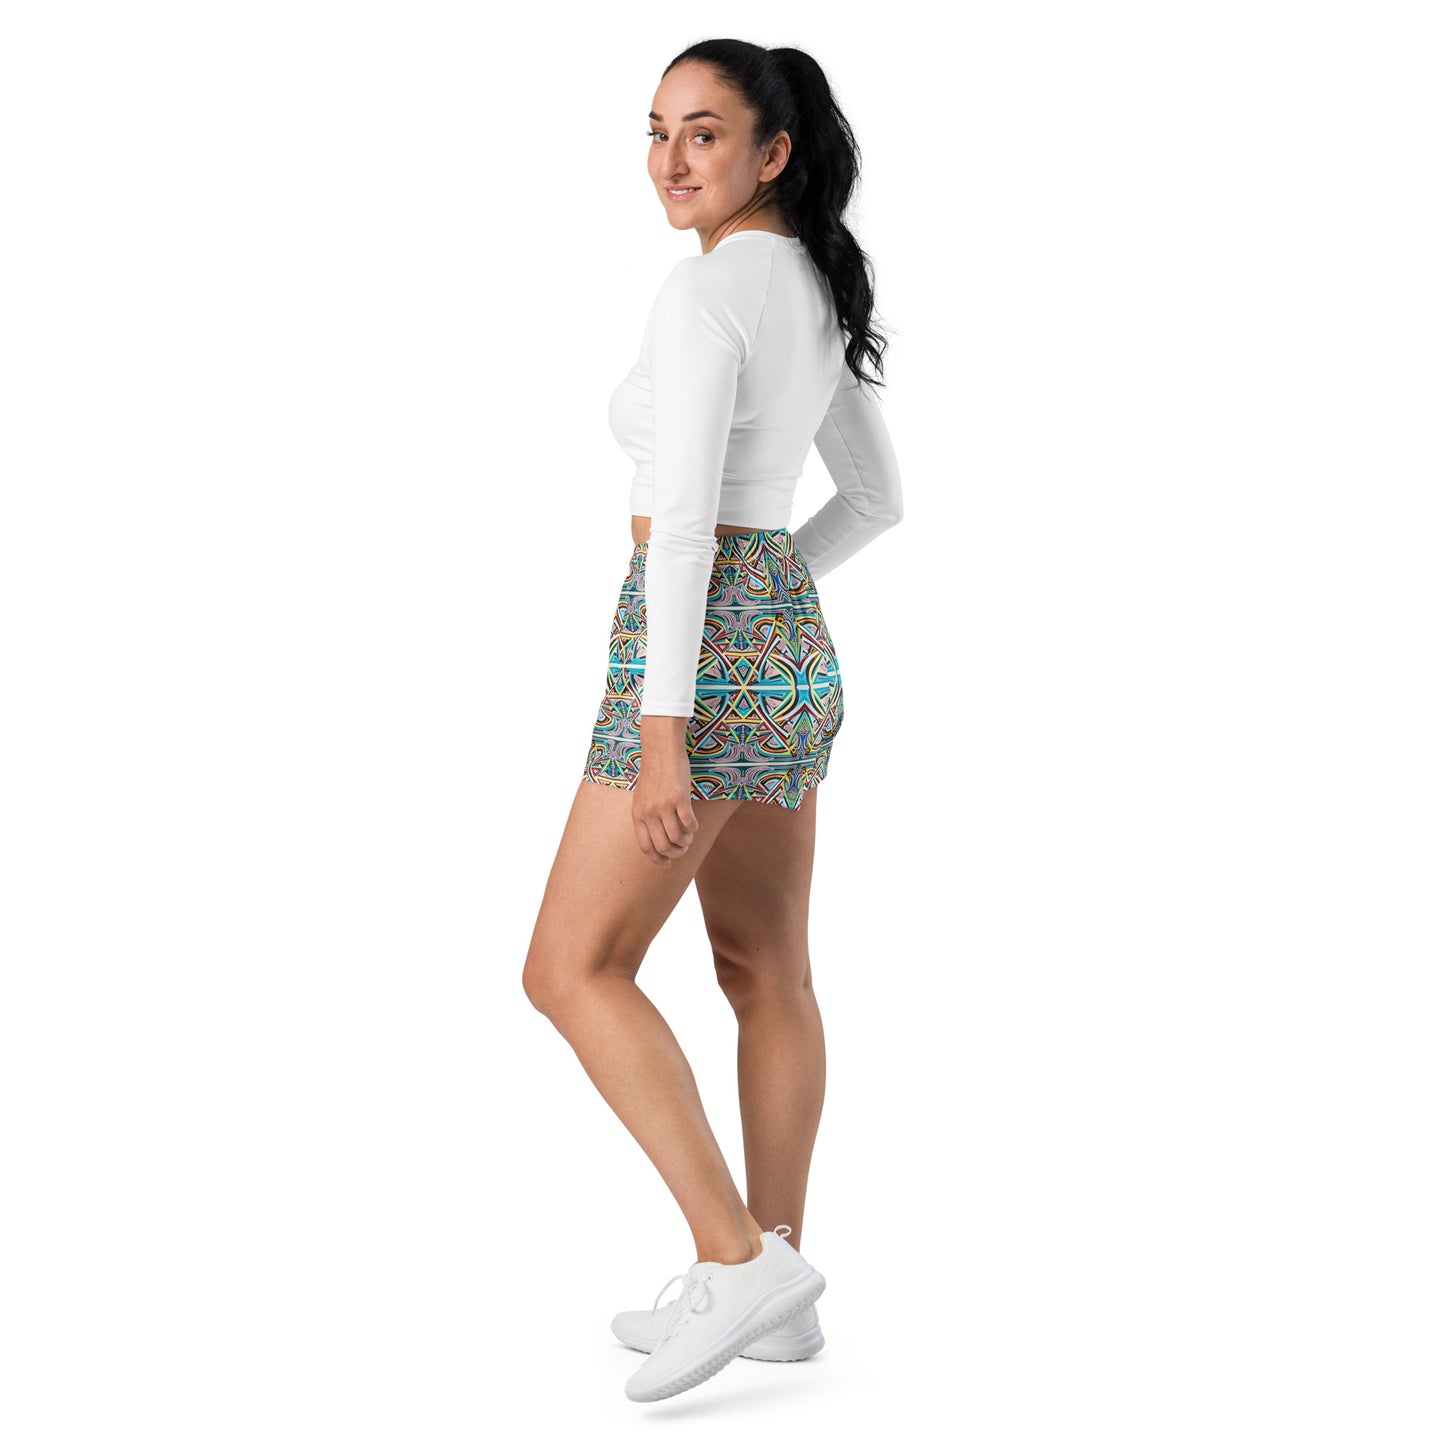 DMV 1677 Conceptual Artsy Women’s Recycled Athletic Shorts